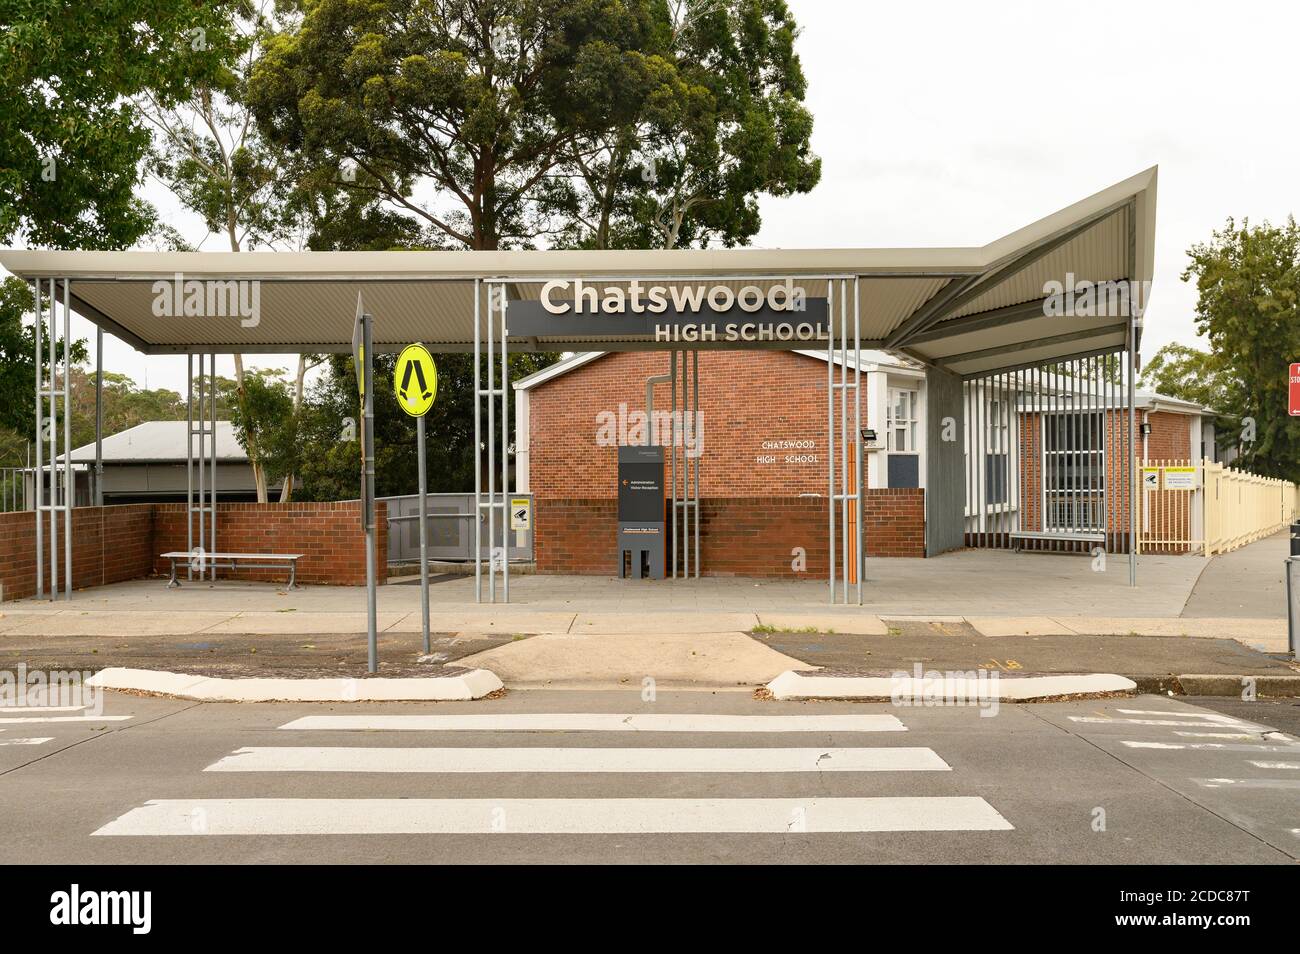 Chatswood High School Facade on a cloudy summer afternoon Stock Photo